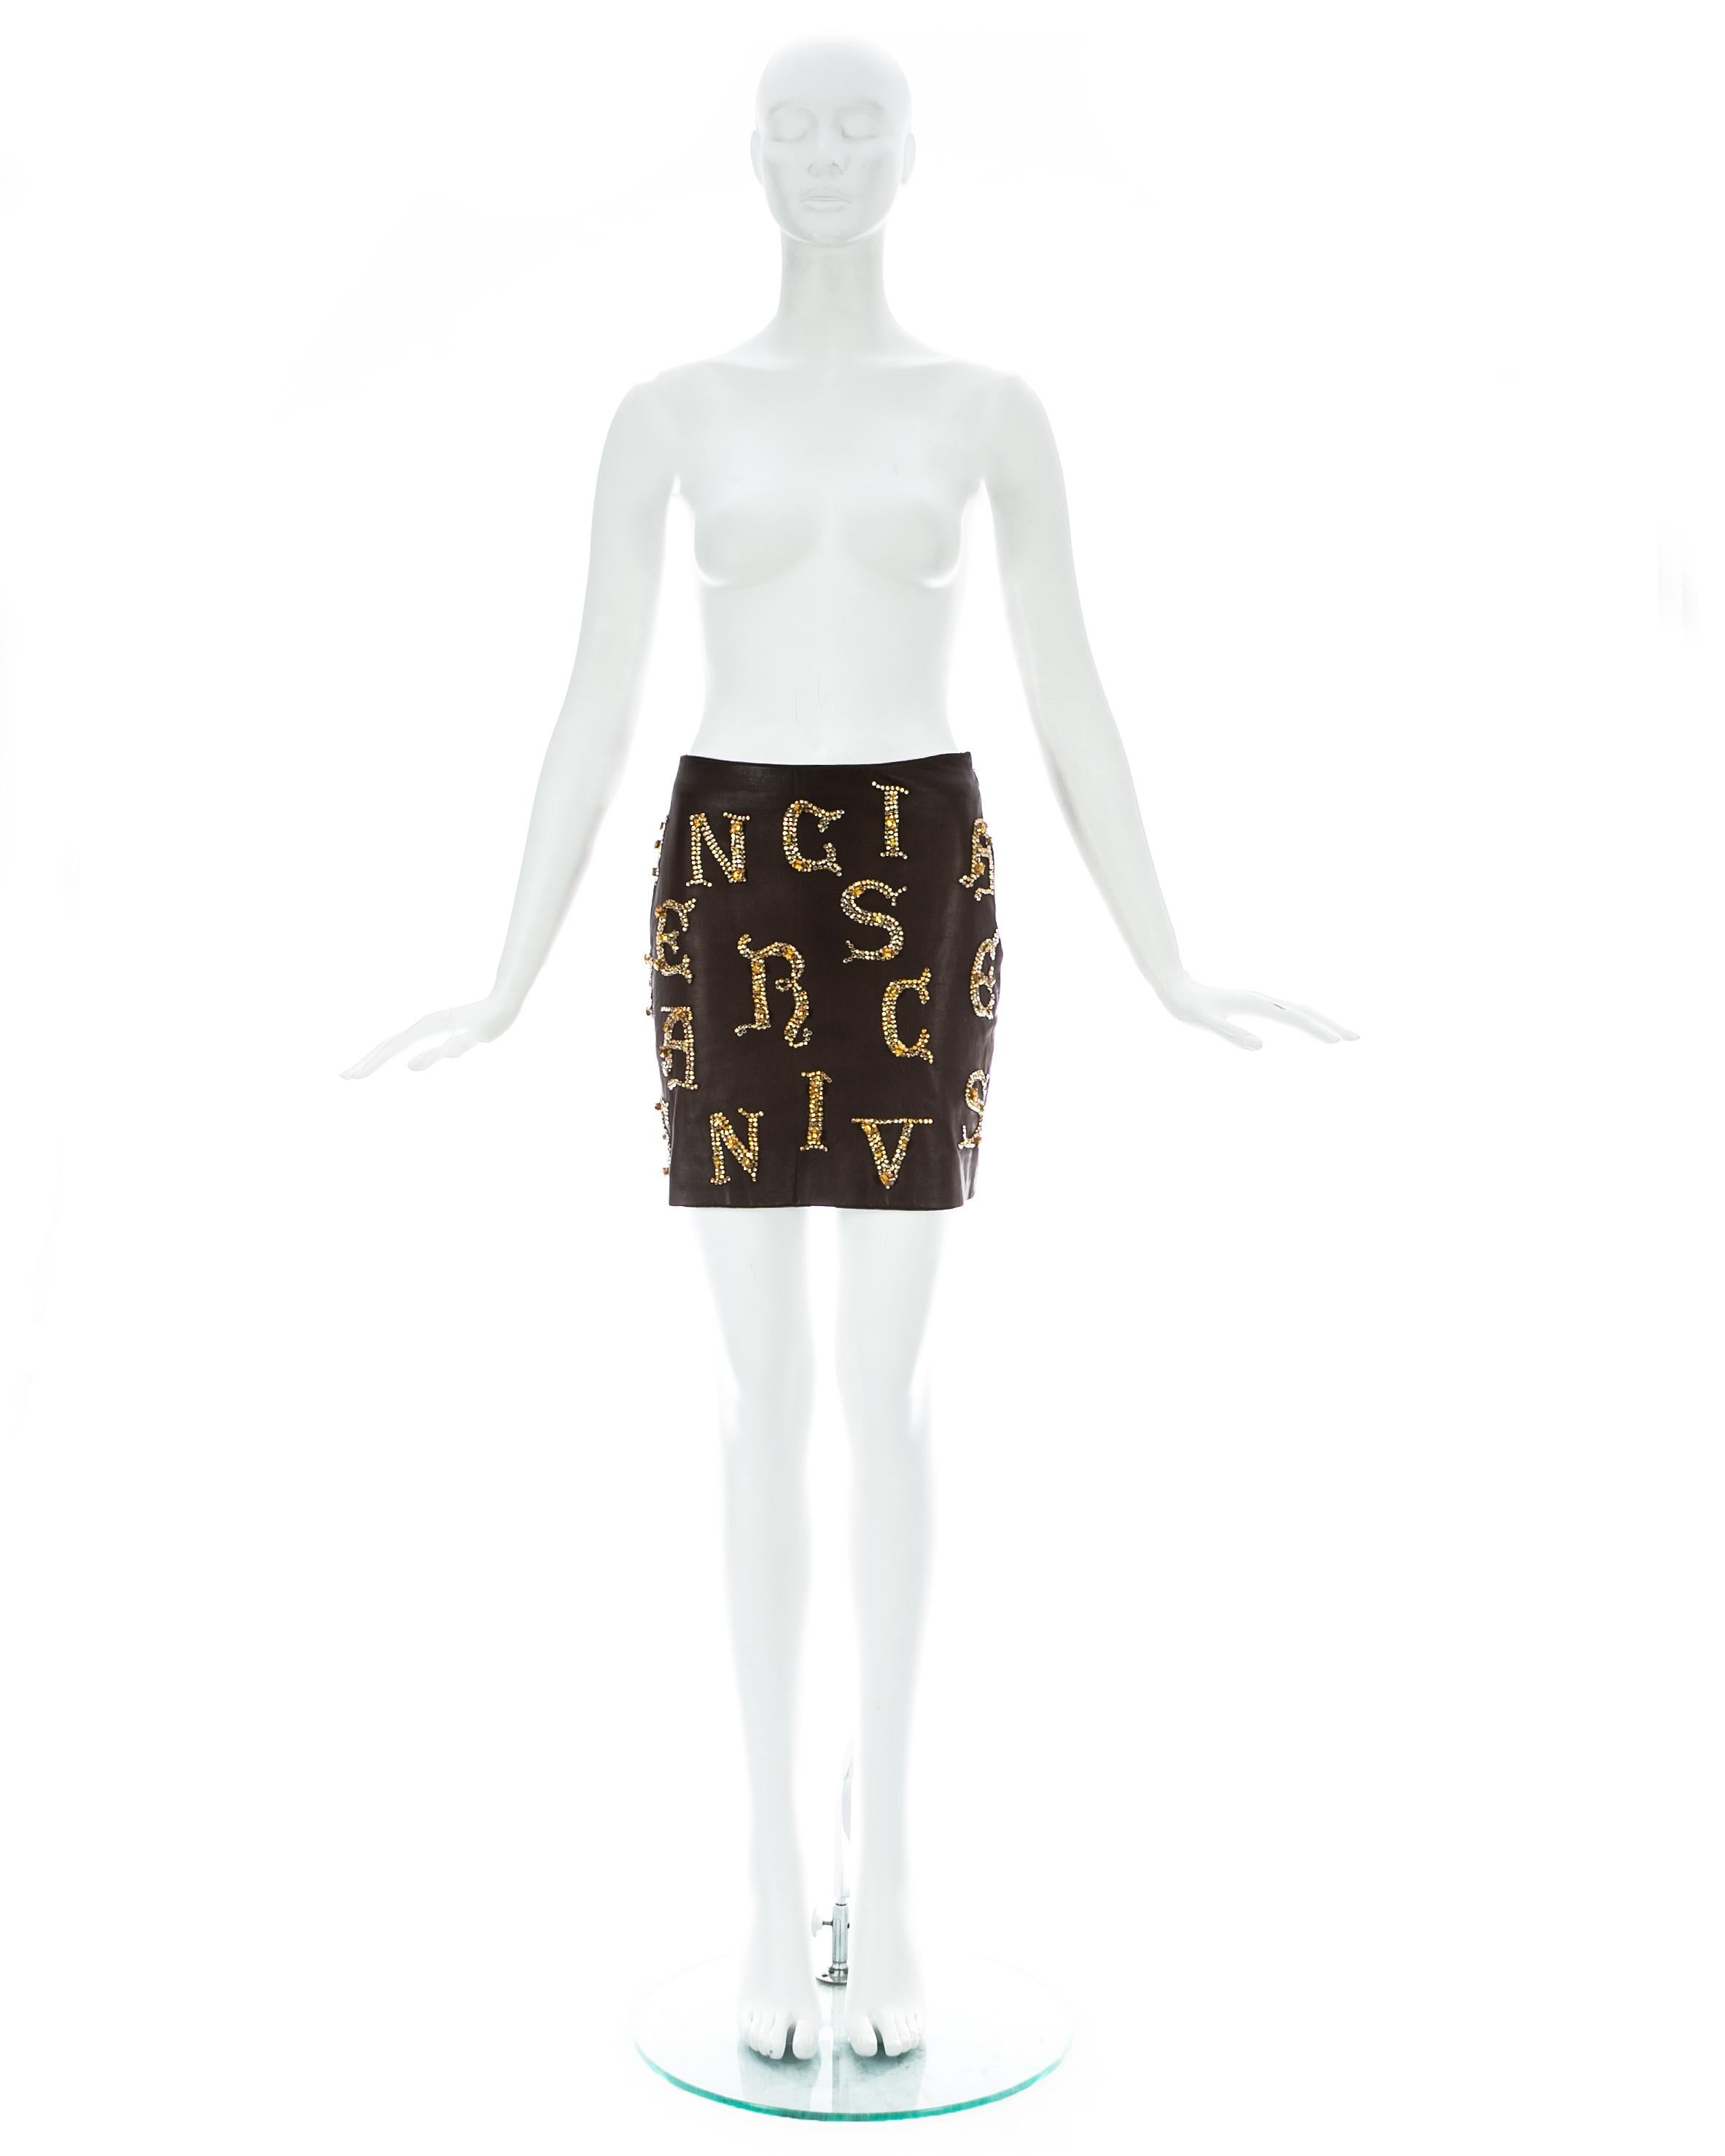 Gianni Versace; Brown leather mini skirt with gold crystal embellished letters throughout, in a gothic front. Silk lining and zip fastening.

Haute Couture, Fall-Winter 1997

(From Gianni Versace's last collection, shown on July 06 1997, Gianni was